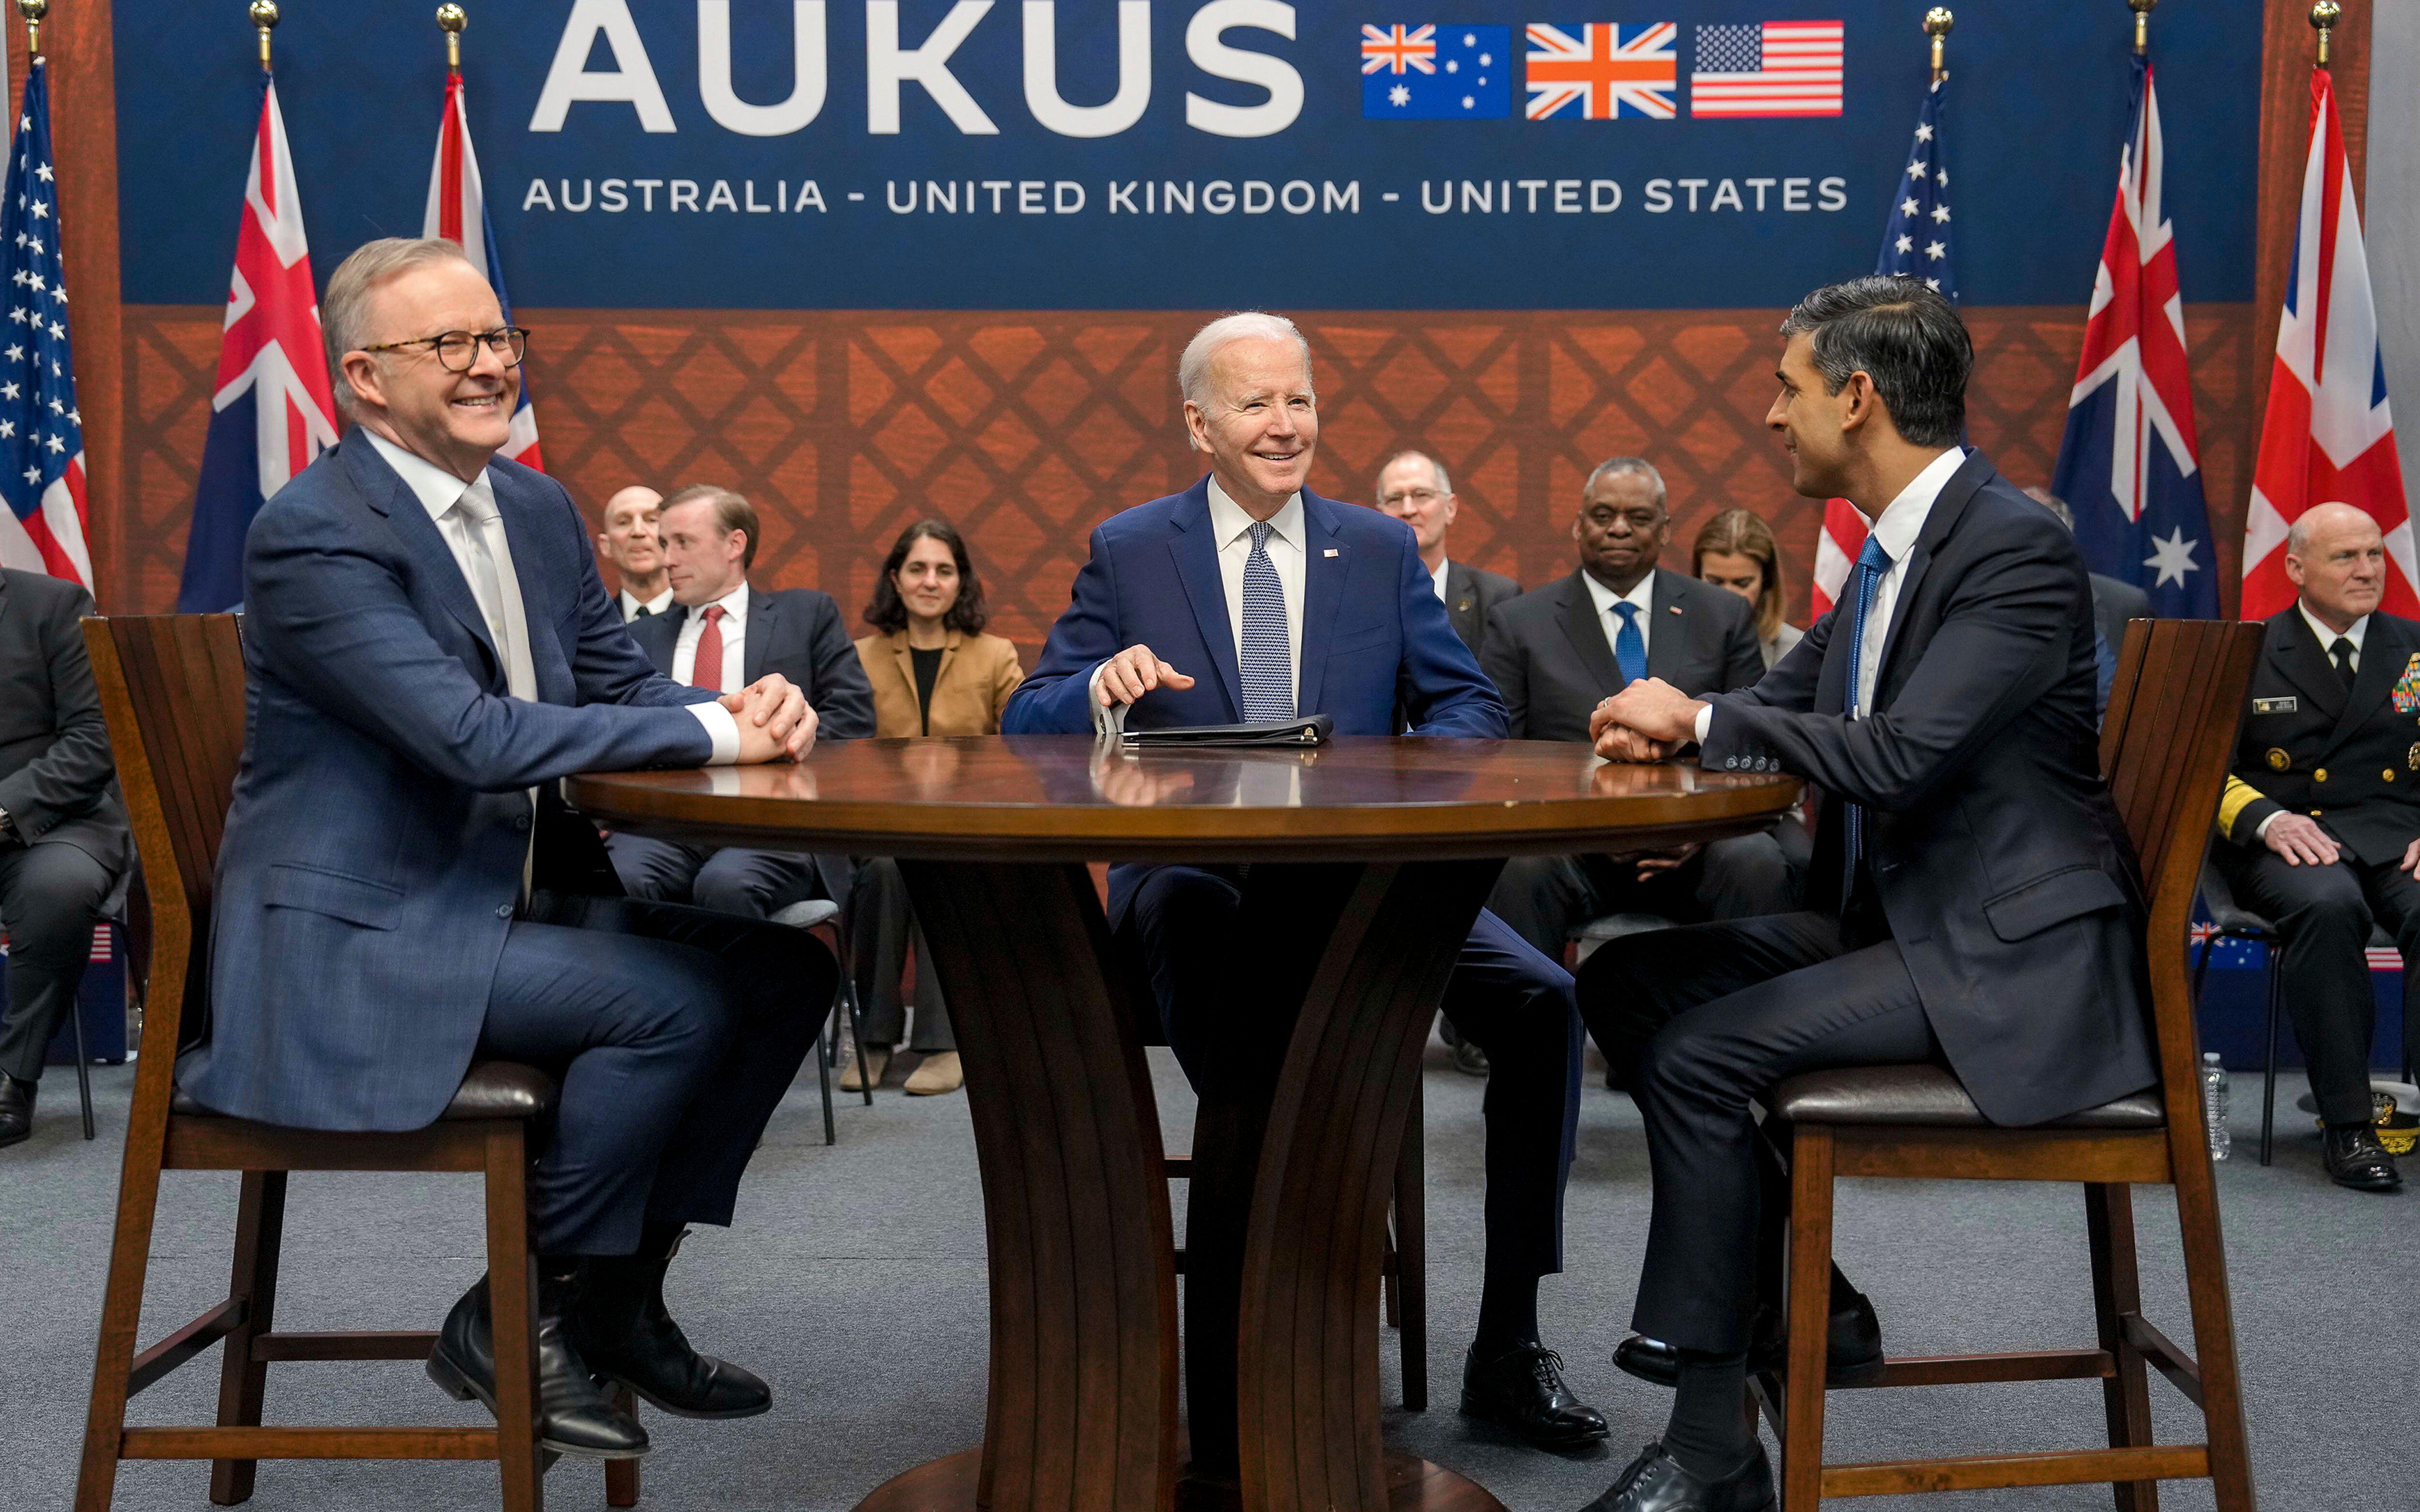 ‘AUKUS in the dock: Questions and challenges for the Albanese government’ by James Curran